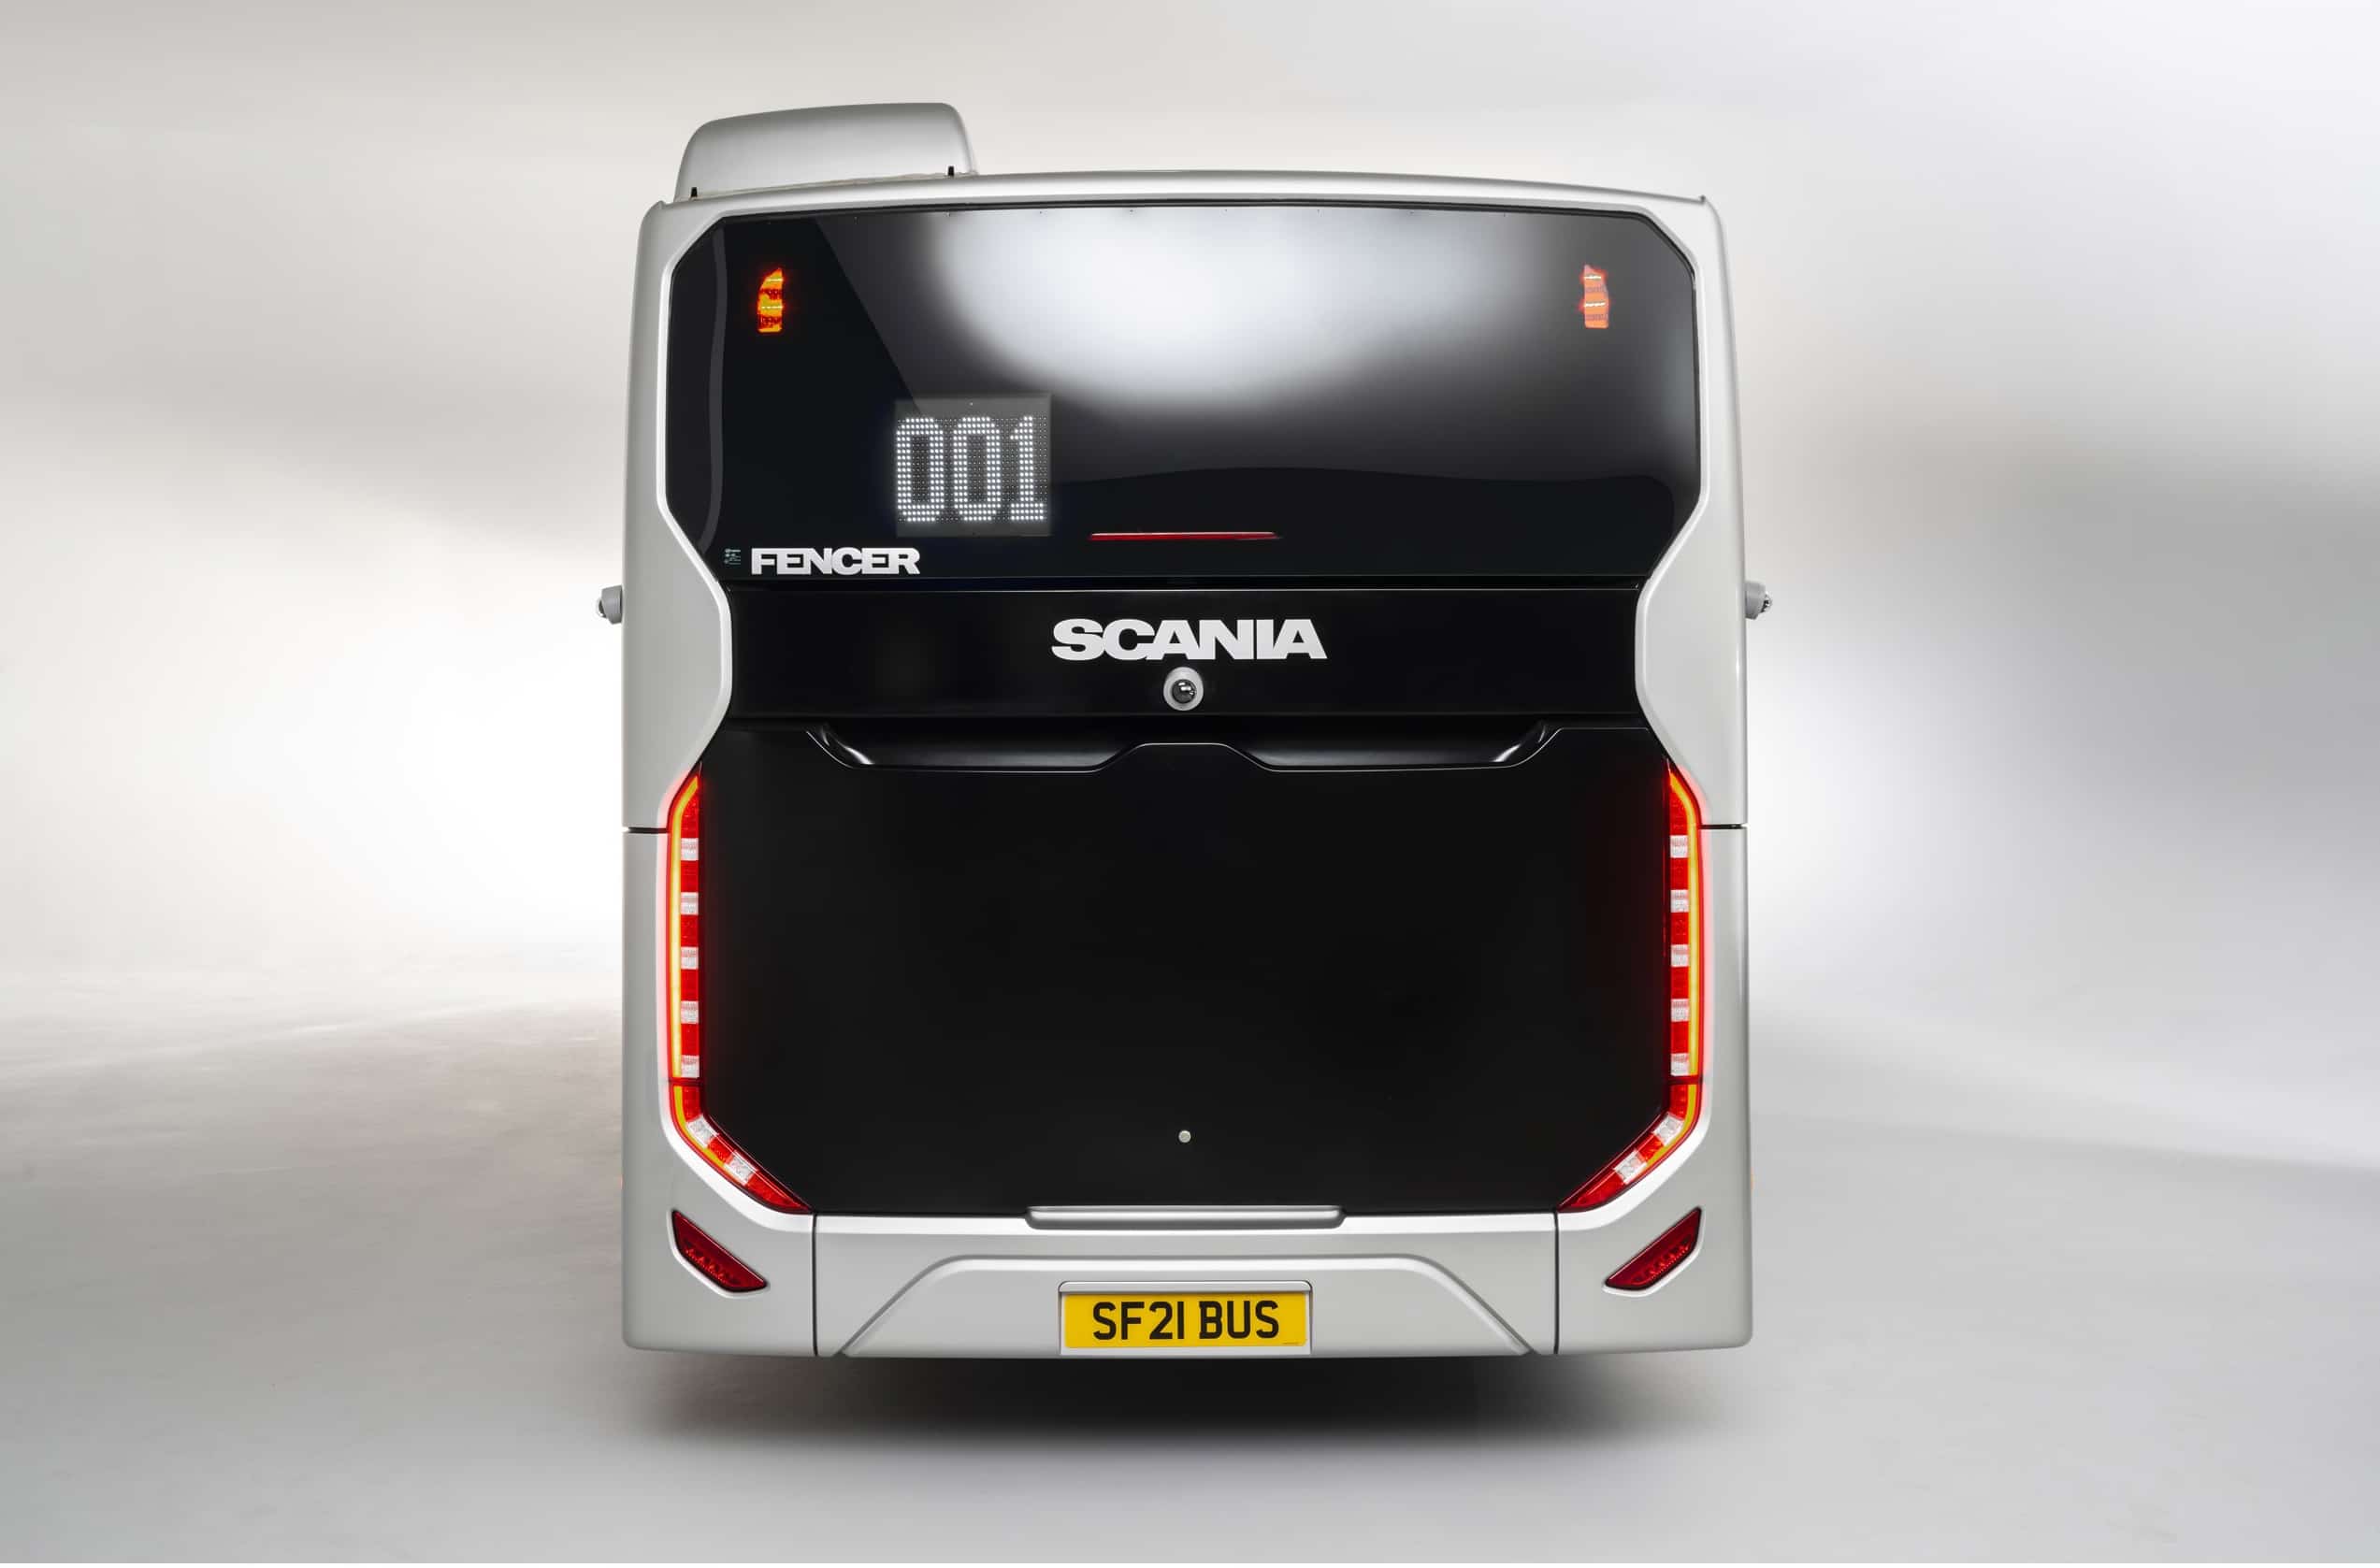 Scania Fencer rear view